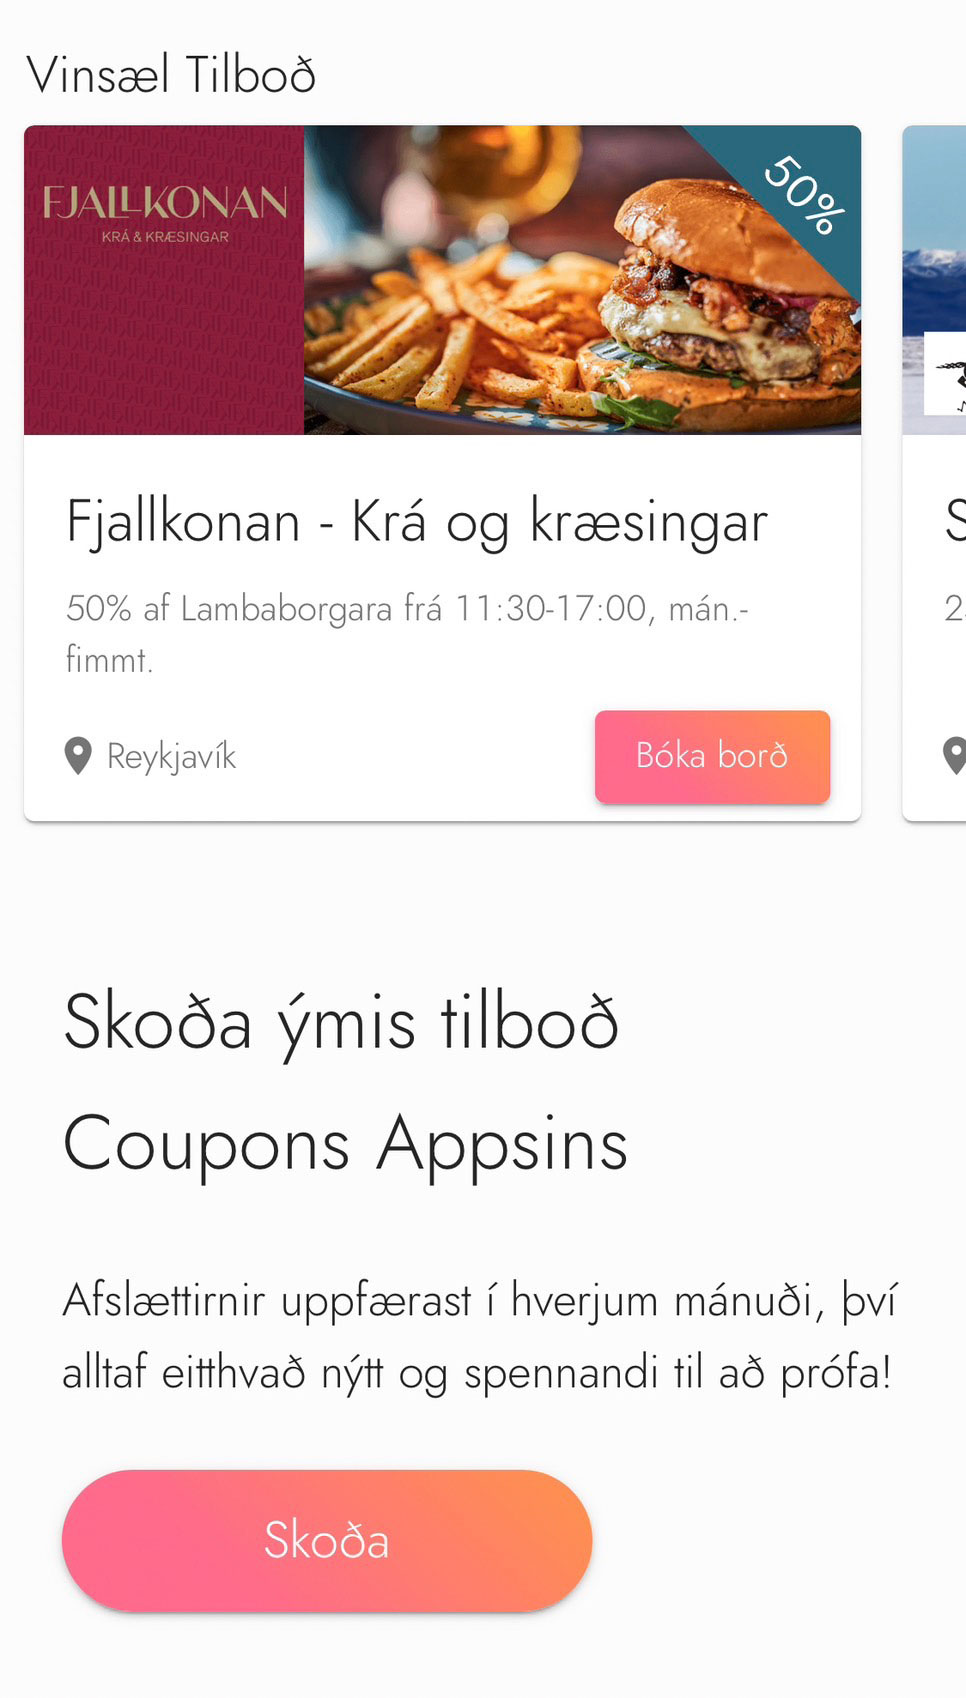 More Discount Coupon in Icelandic Coupons Application, Iceland